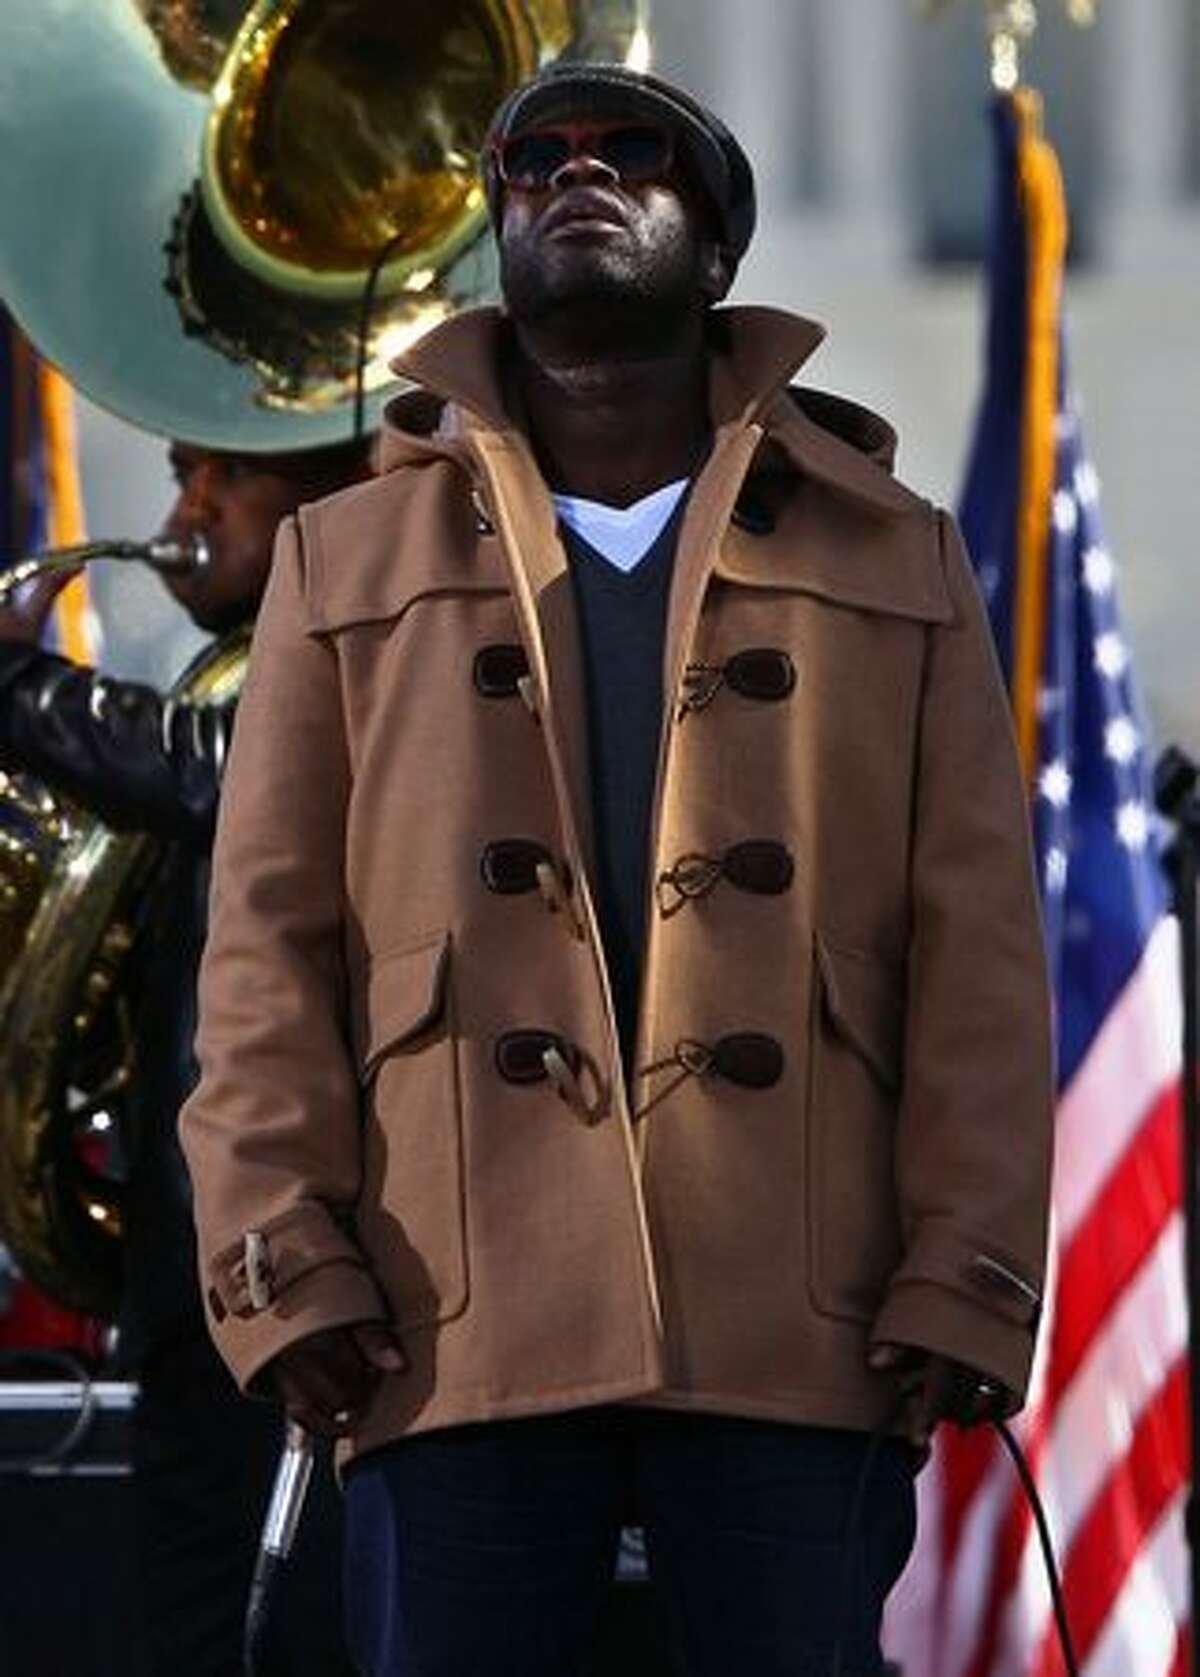 WASHINGTON - OCTOBER 30: Black Thought of The Roots performs at the Rally To Restore Sanity And/Or Fear on the National Mall on October 30, 2010 in Washington, DC. Comedians Jon Stewart and Steven Colbert are scheduled to hold the rally, which tens of thousands of people are expected to attend.